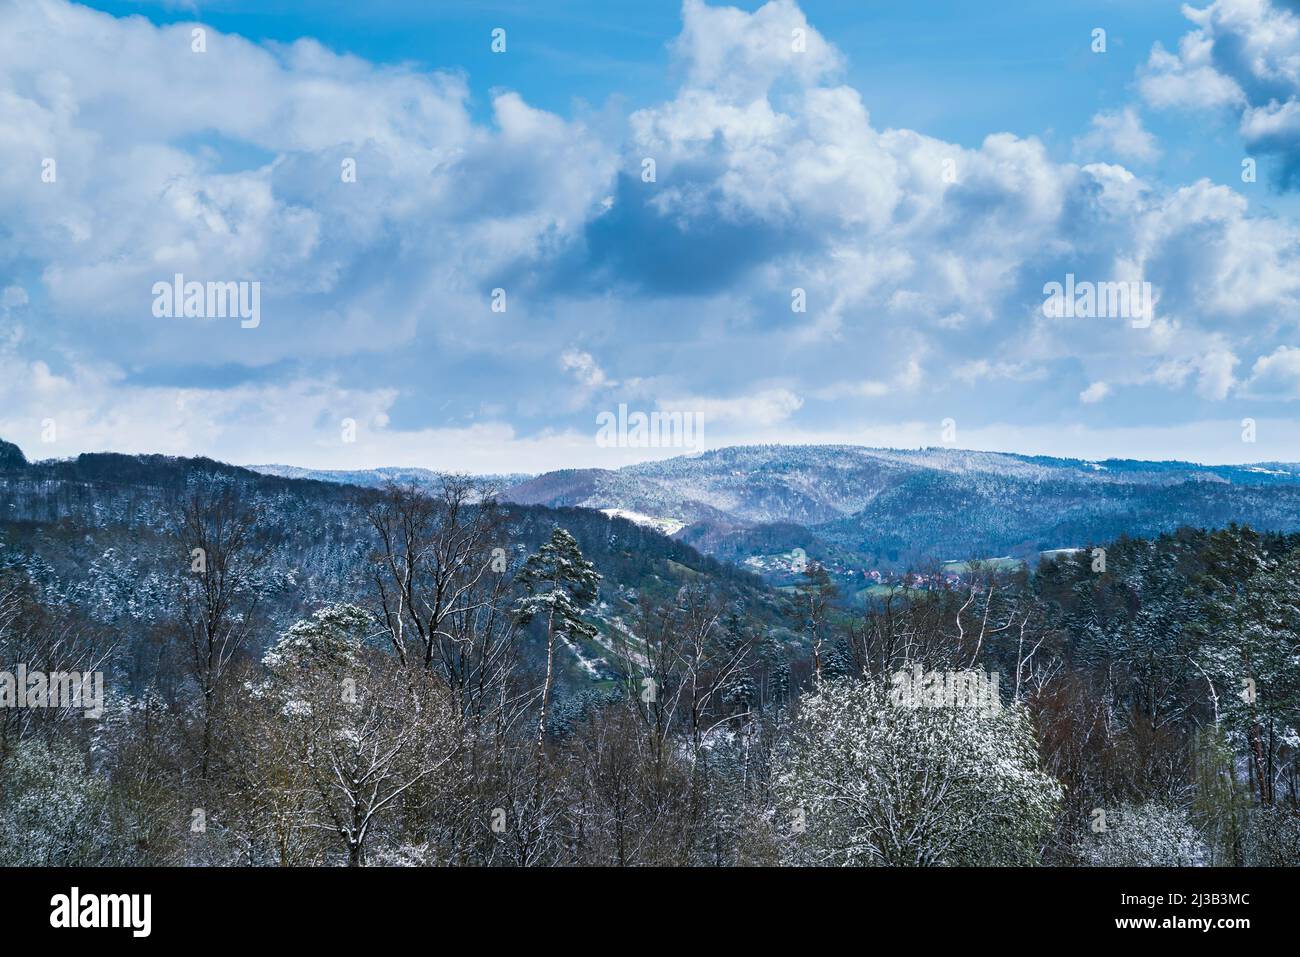 Germany, View above the forest schwaebischer wald above the white snow covered tree tops near rudersberg town houses Stock Photo